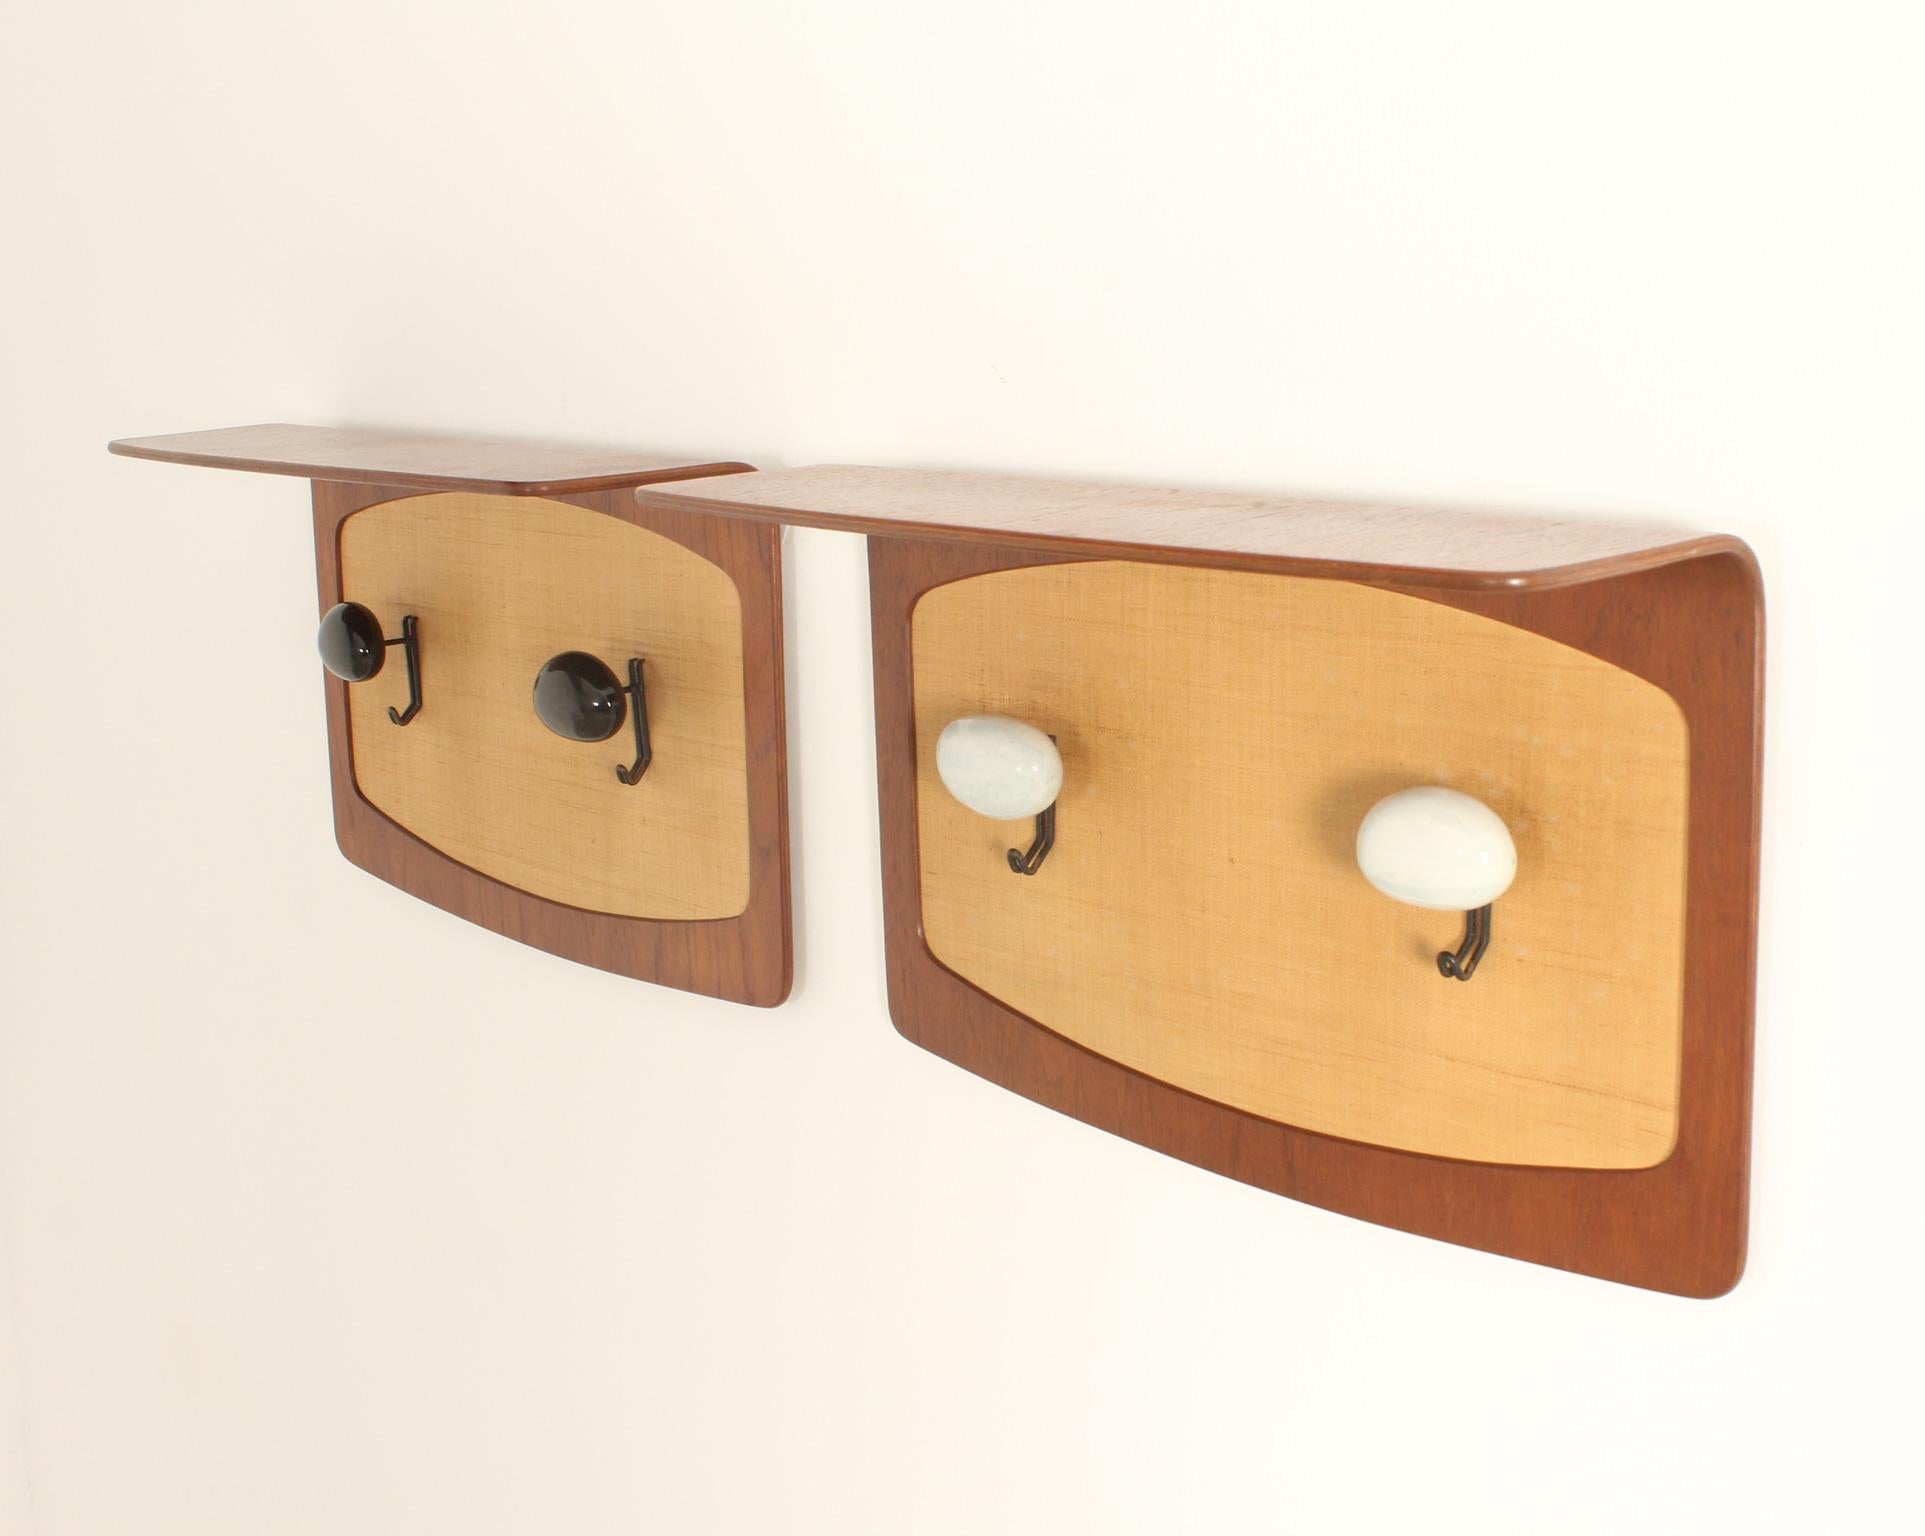 Pair of Coat Racks in Teak and Seagrass by Campo & Graffi for Home, 1950's  For Sale 2